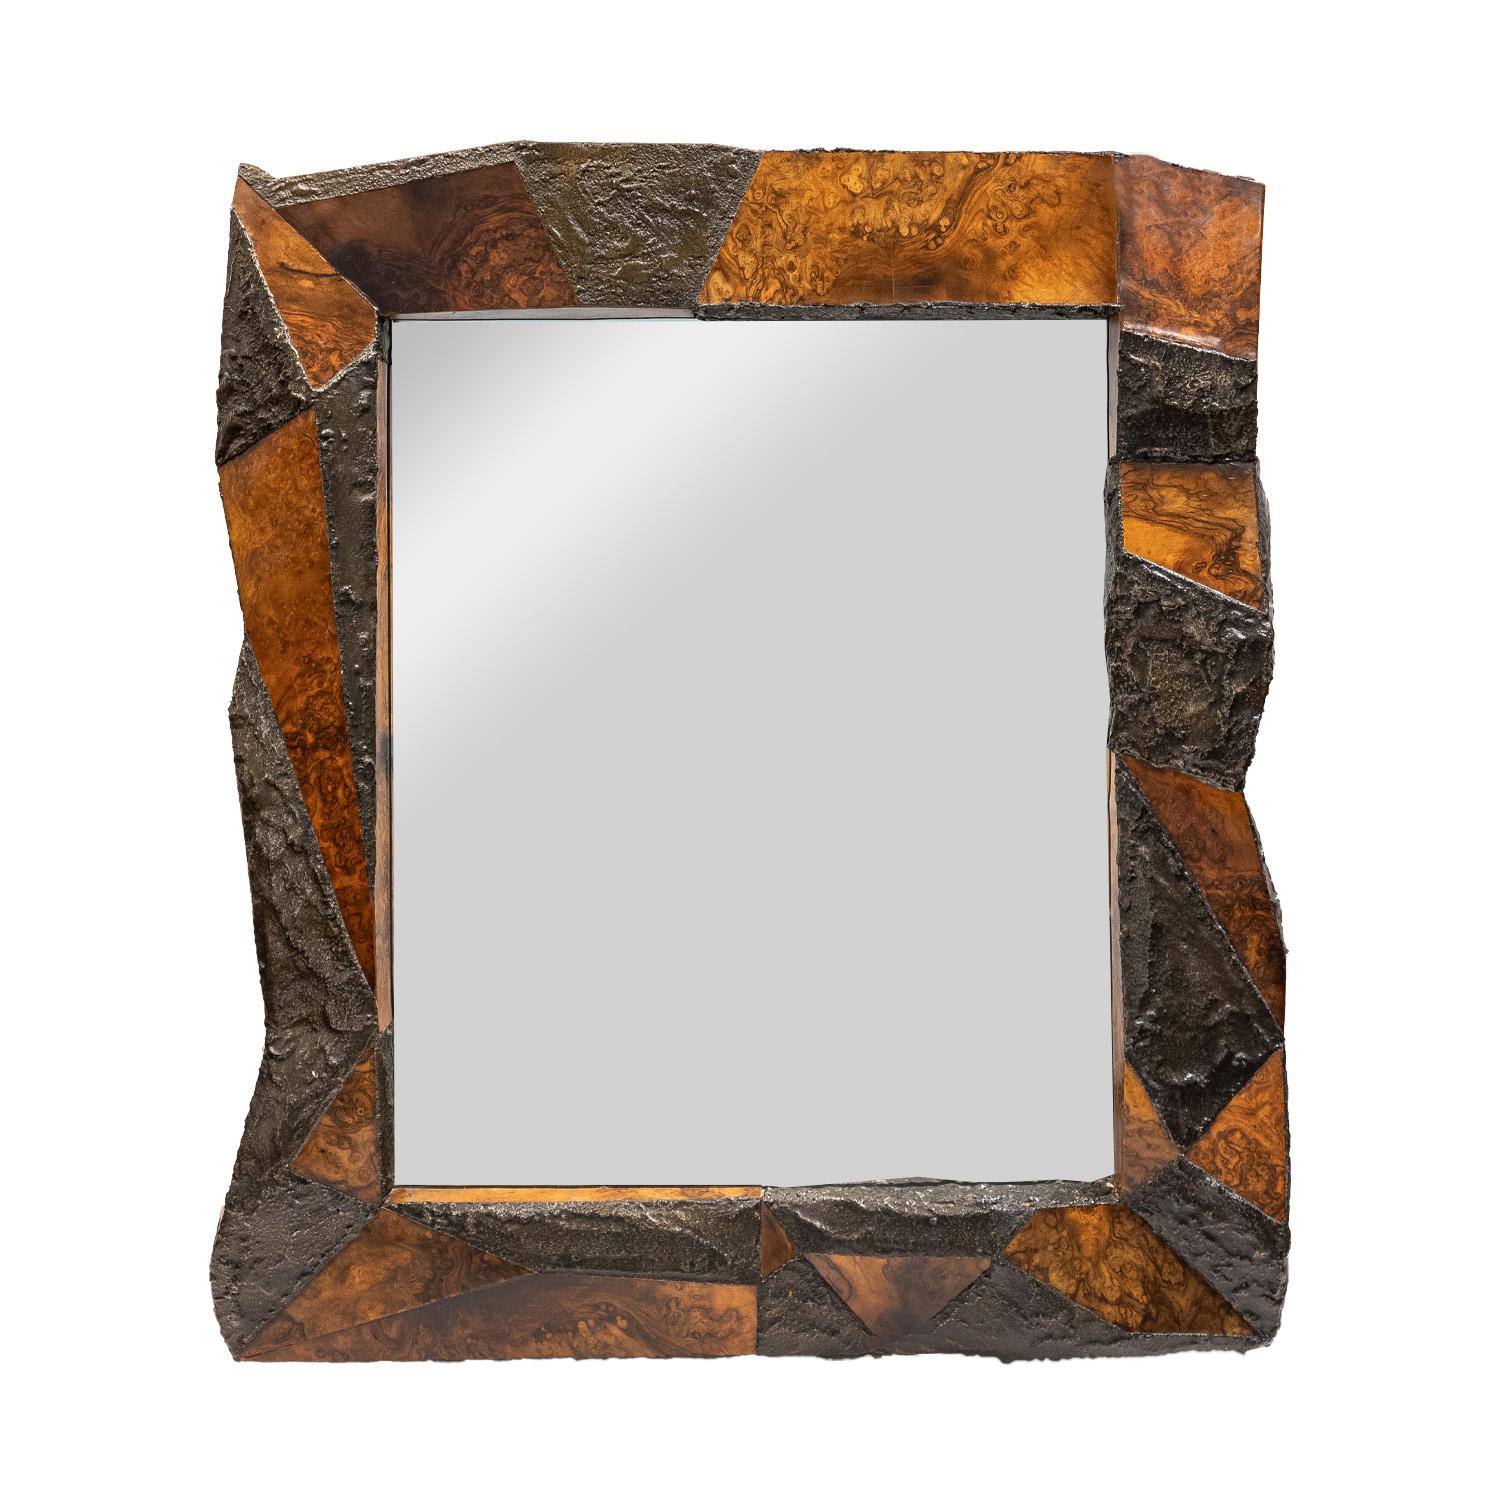 Rare and unique multi-planar mirror in bronze resin and walnut burl by Paul Evans, American 1975. Comes with original cleat marked “PE - 908.” We have not seen any other mirror like this one. The original owner purchased this with a wall-mount Paul